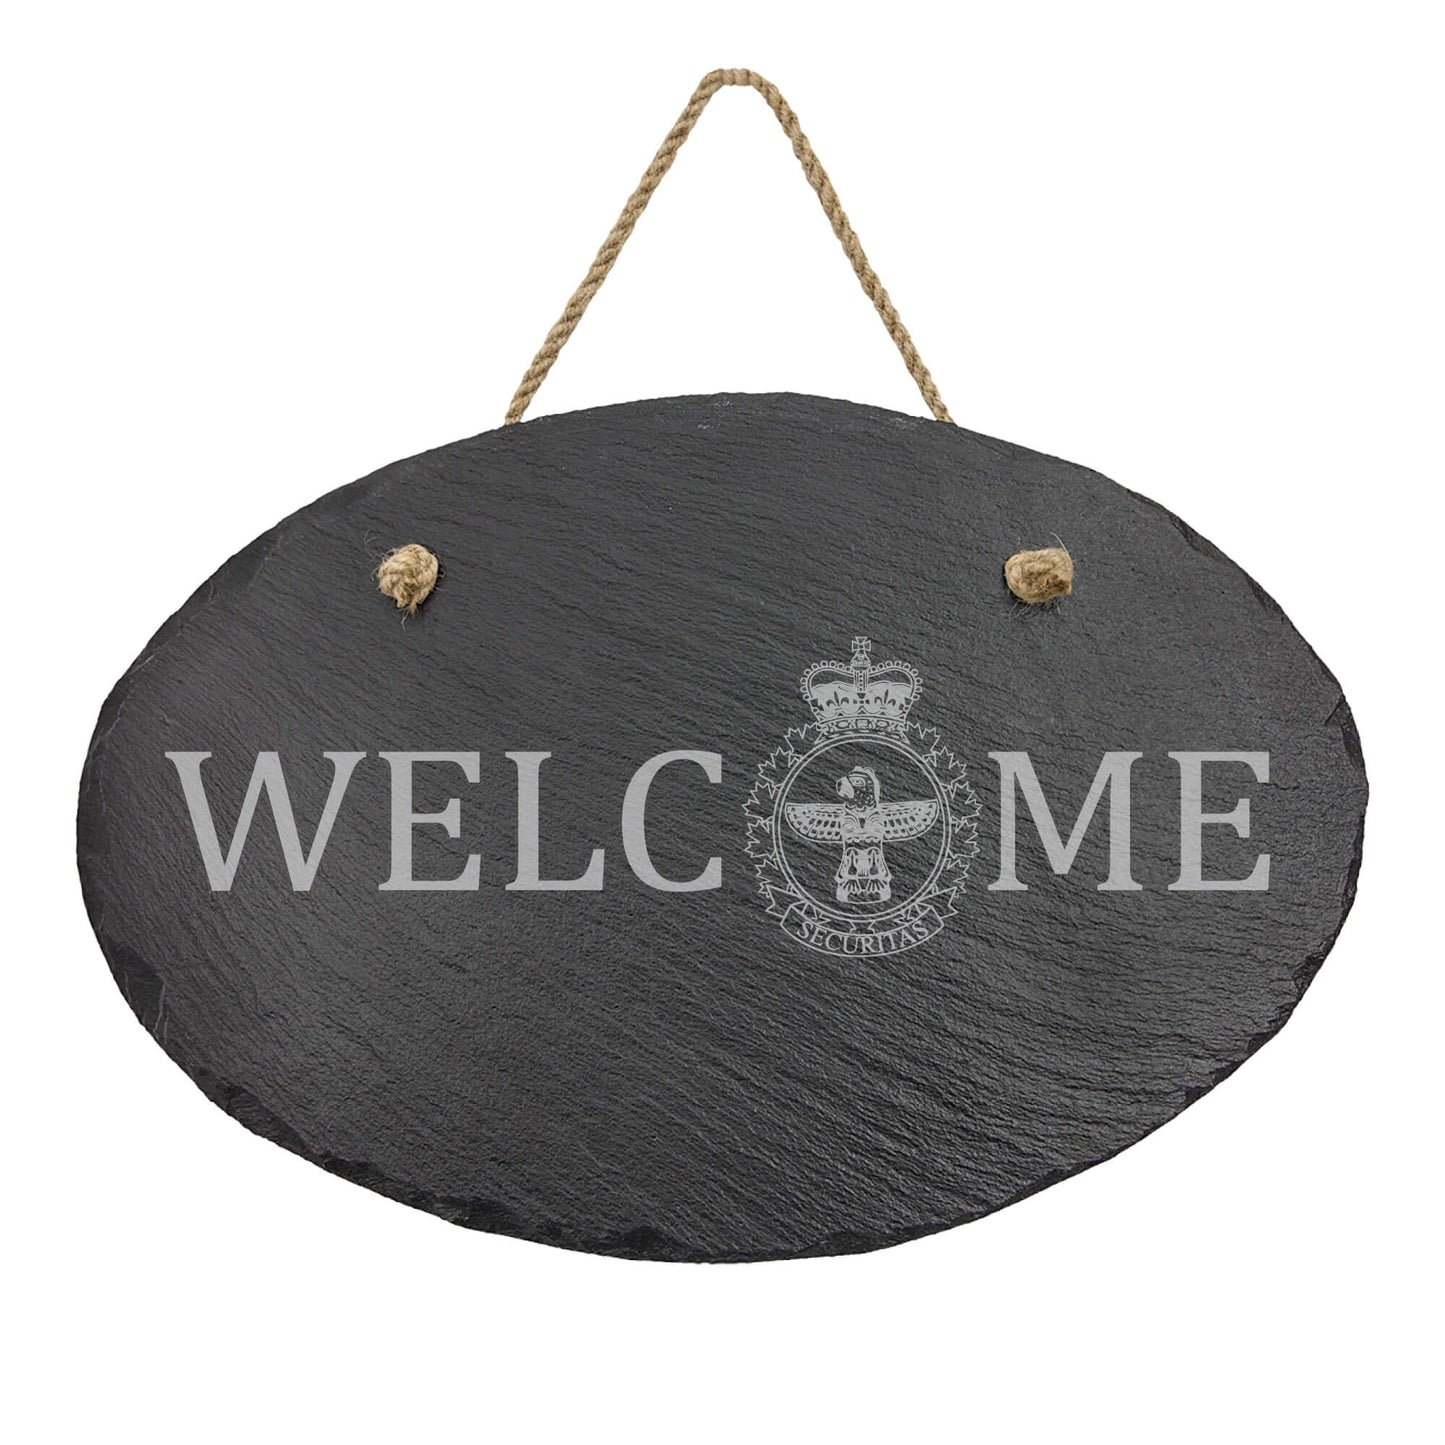 Military Police Canada Oval Hanging Slate Decor-911 Duty Gear Canada-911 Duty Gear Canada